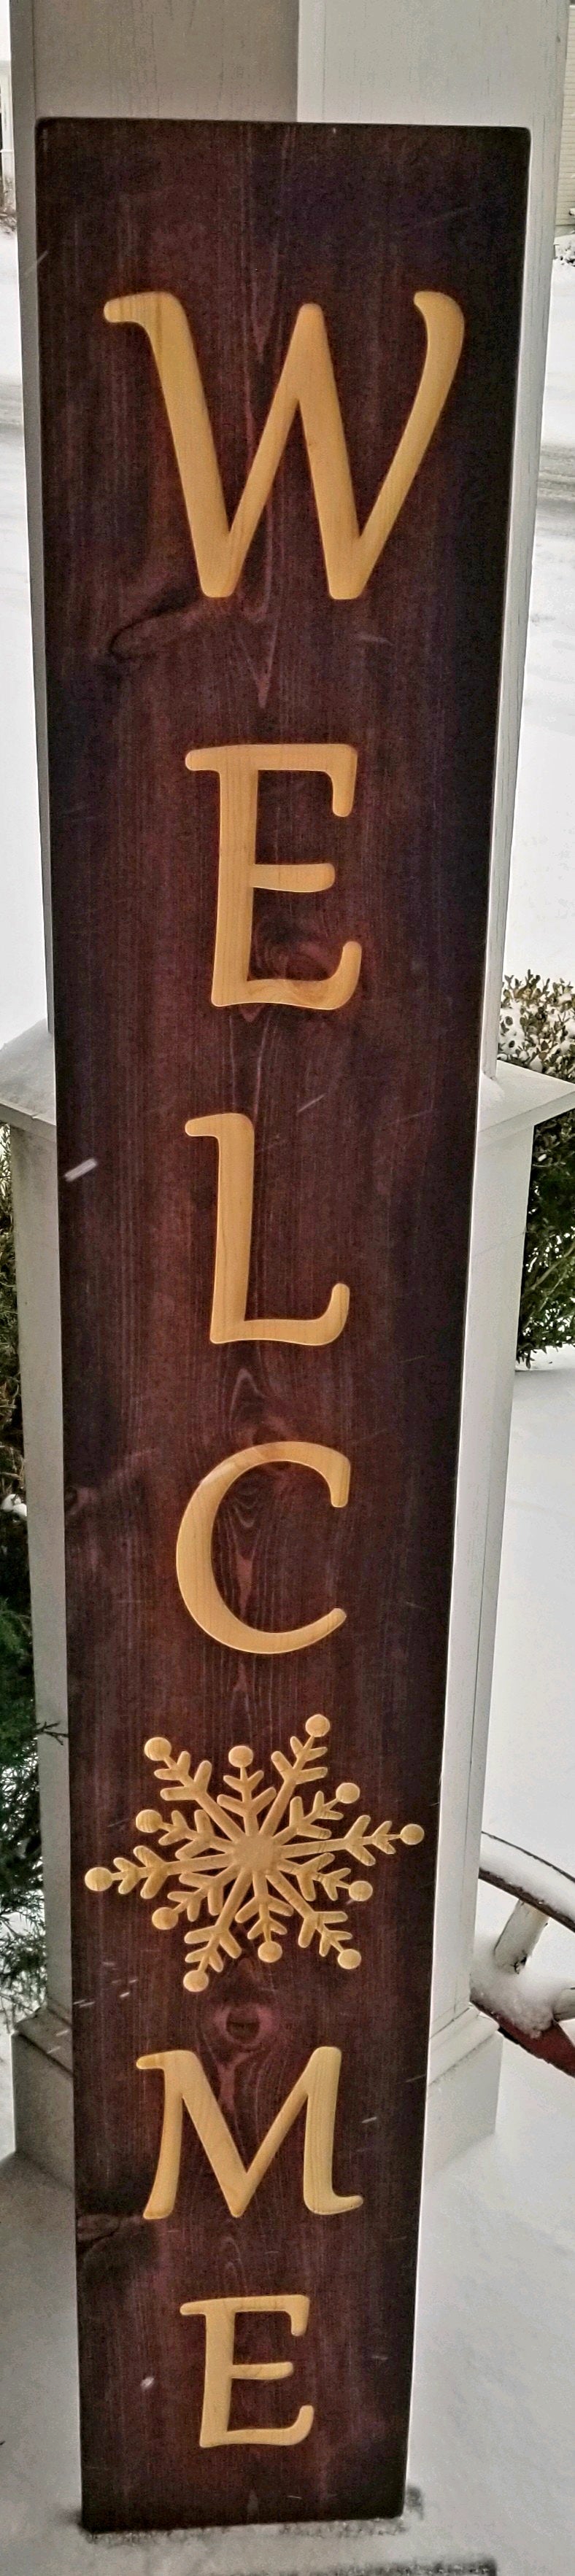 HOLIDAY PORCH SIGNS- WOOD ENGRAVED- WELCOME (Black Cherry)